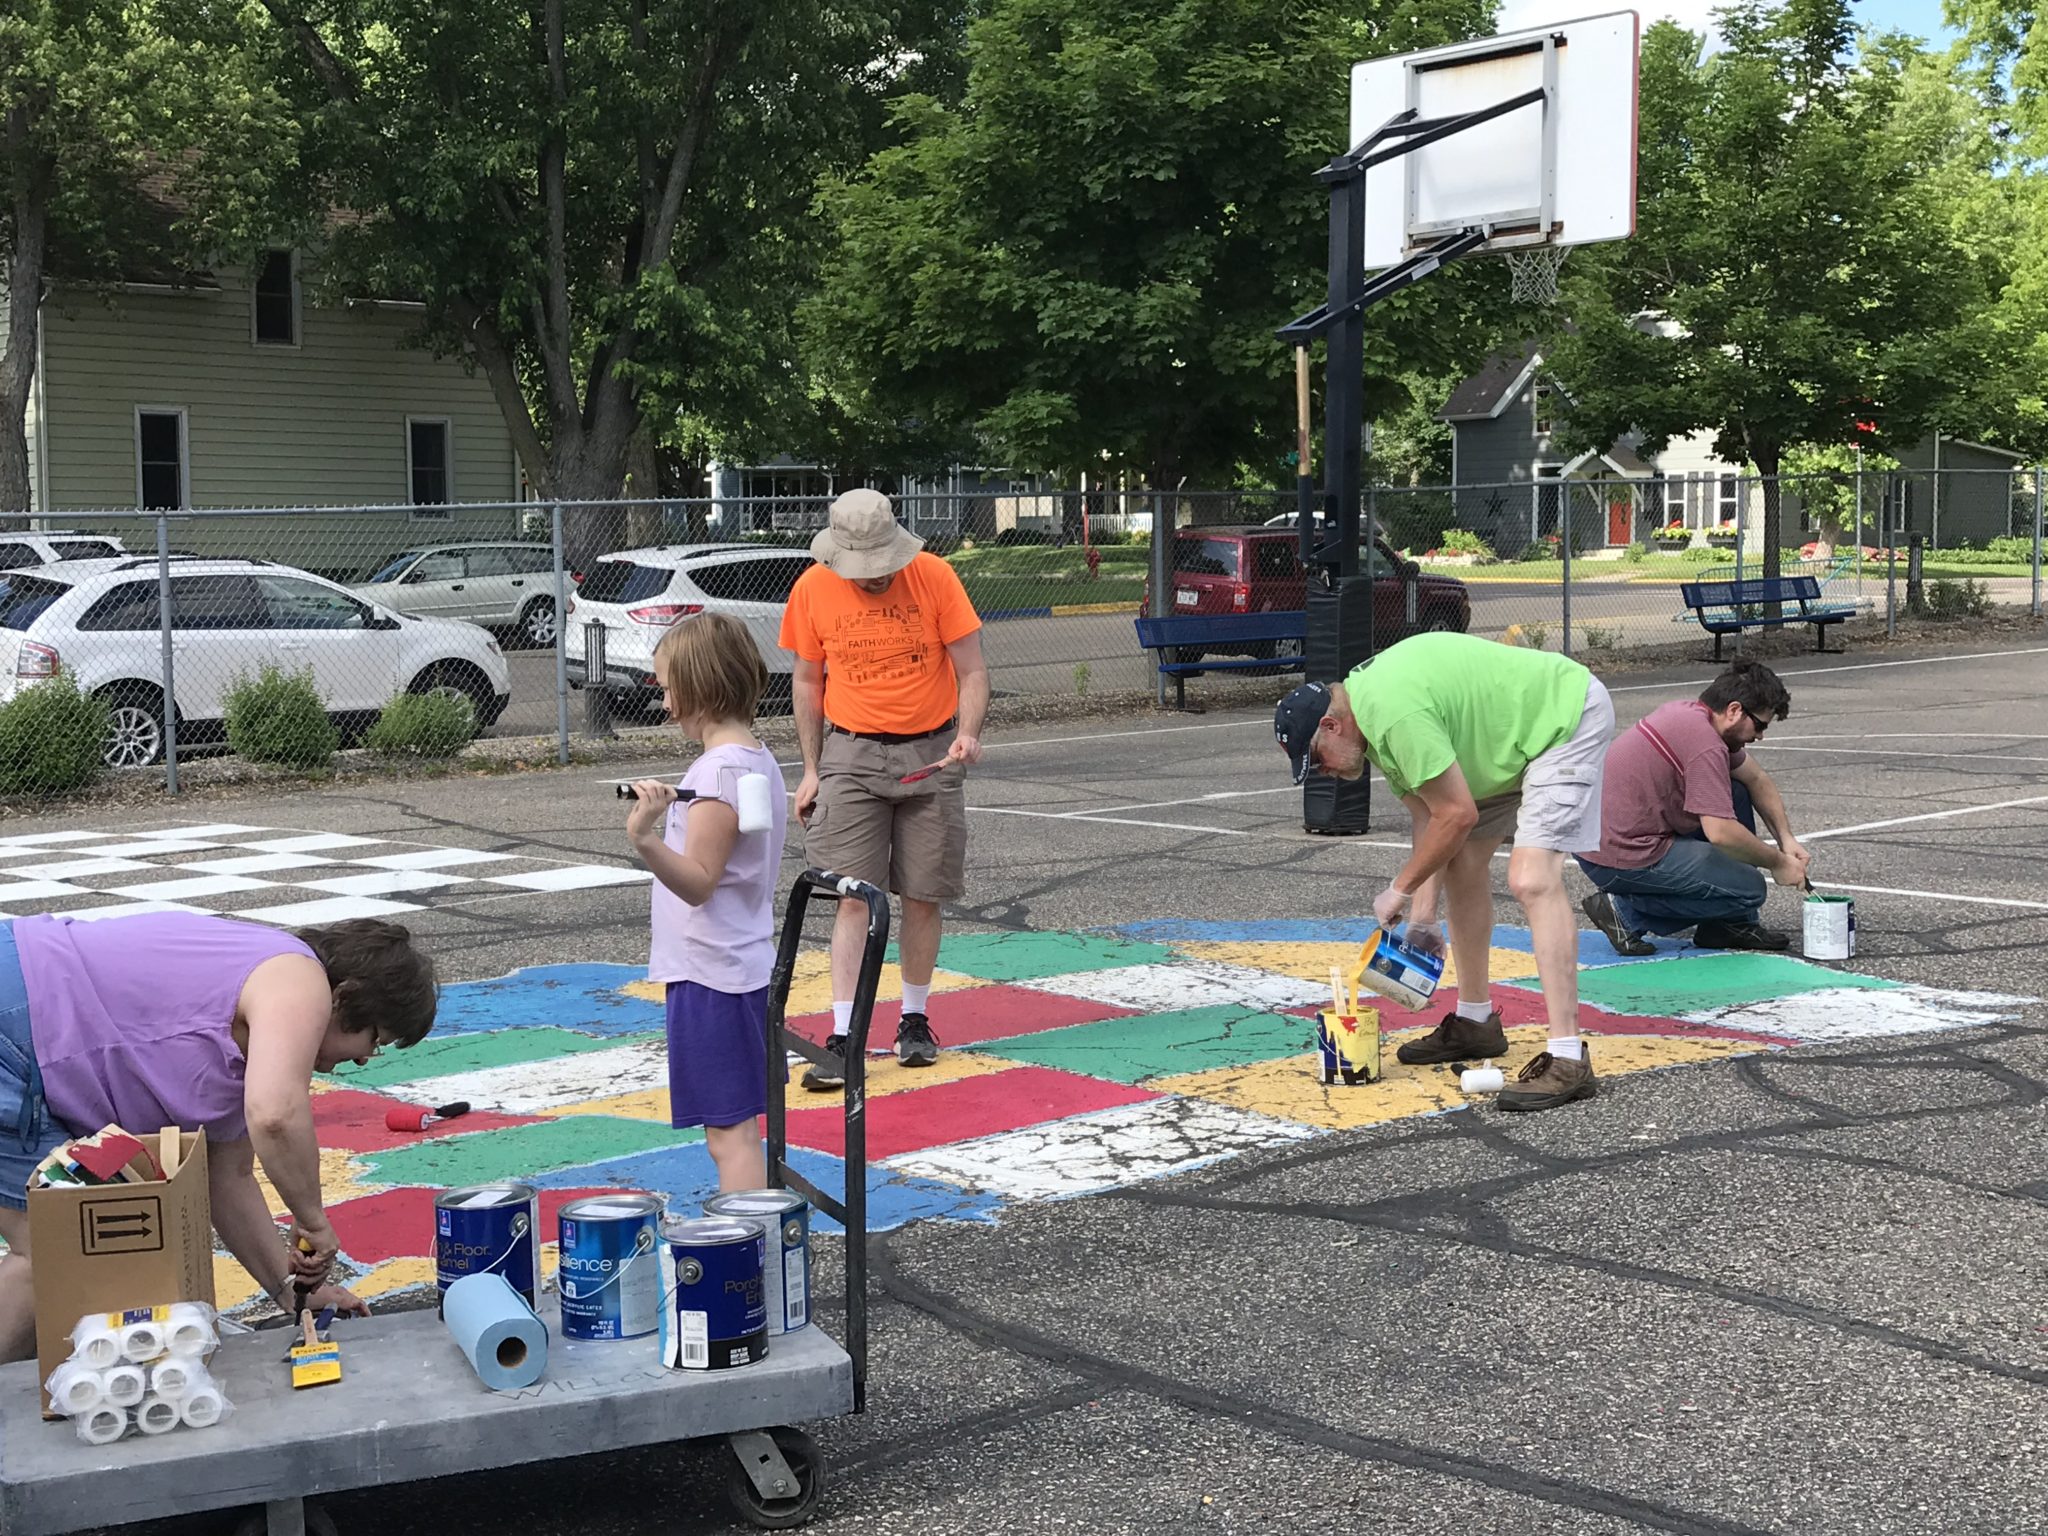 A group of children and adults painting the United States map on the playground pavement.